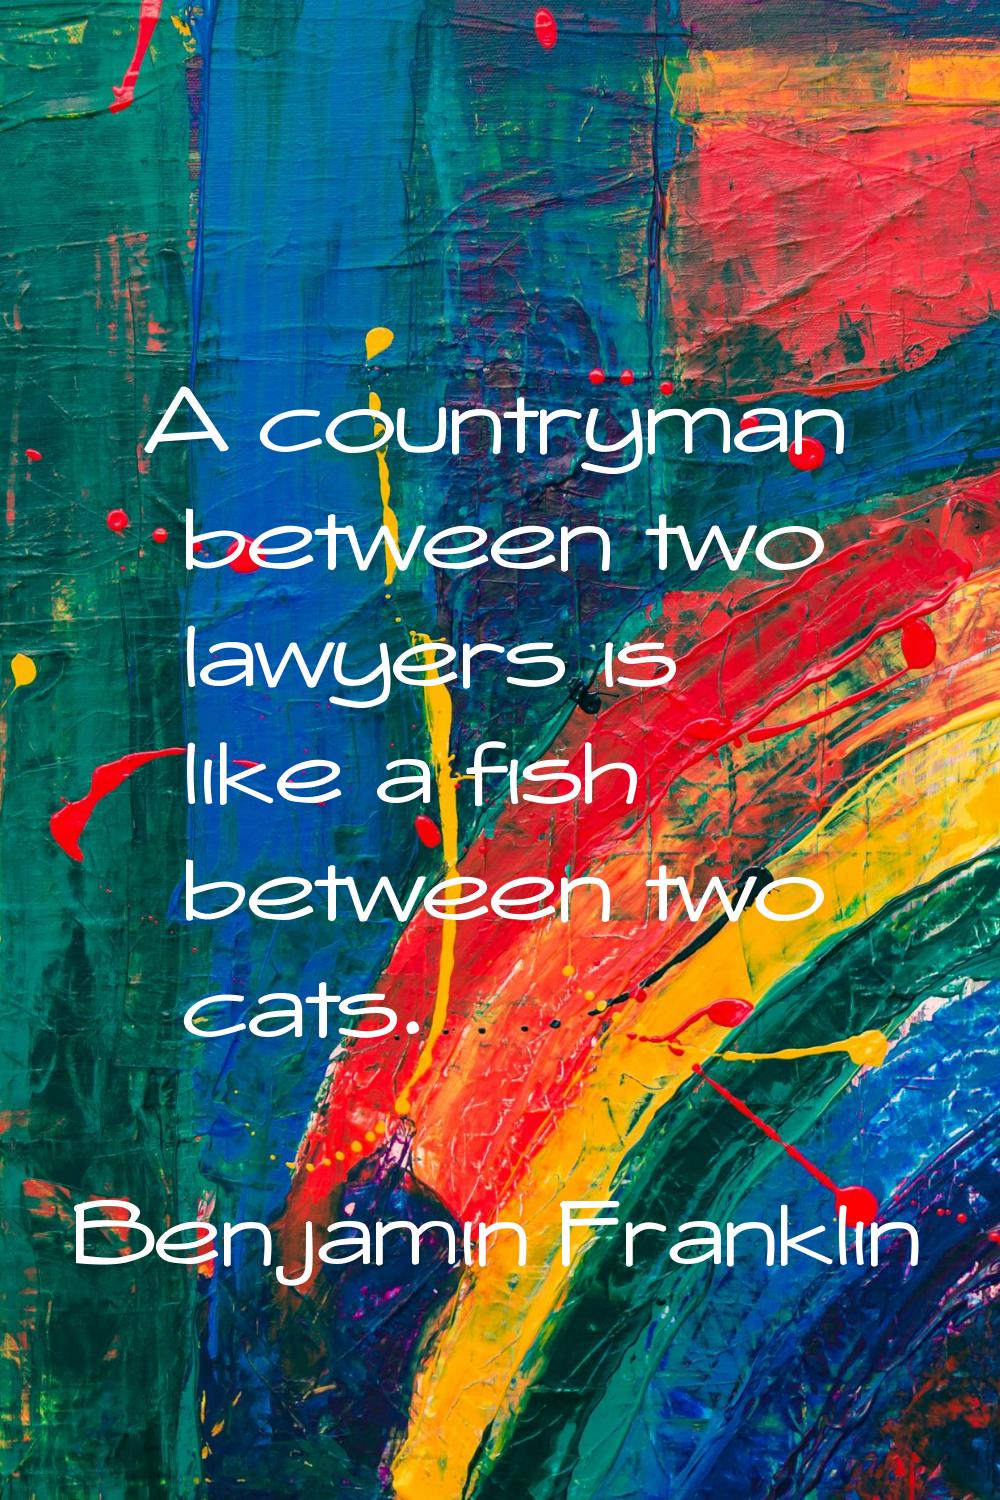 A countryman between two lawyers is like a fish between two cats.